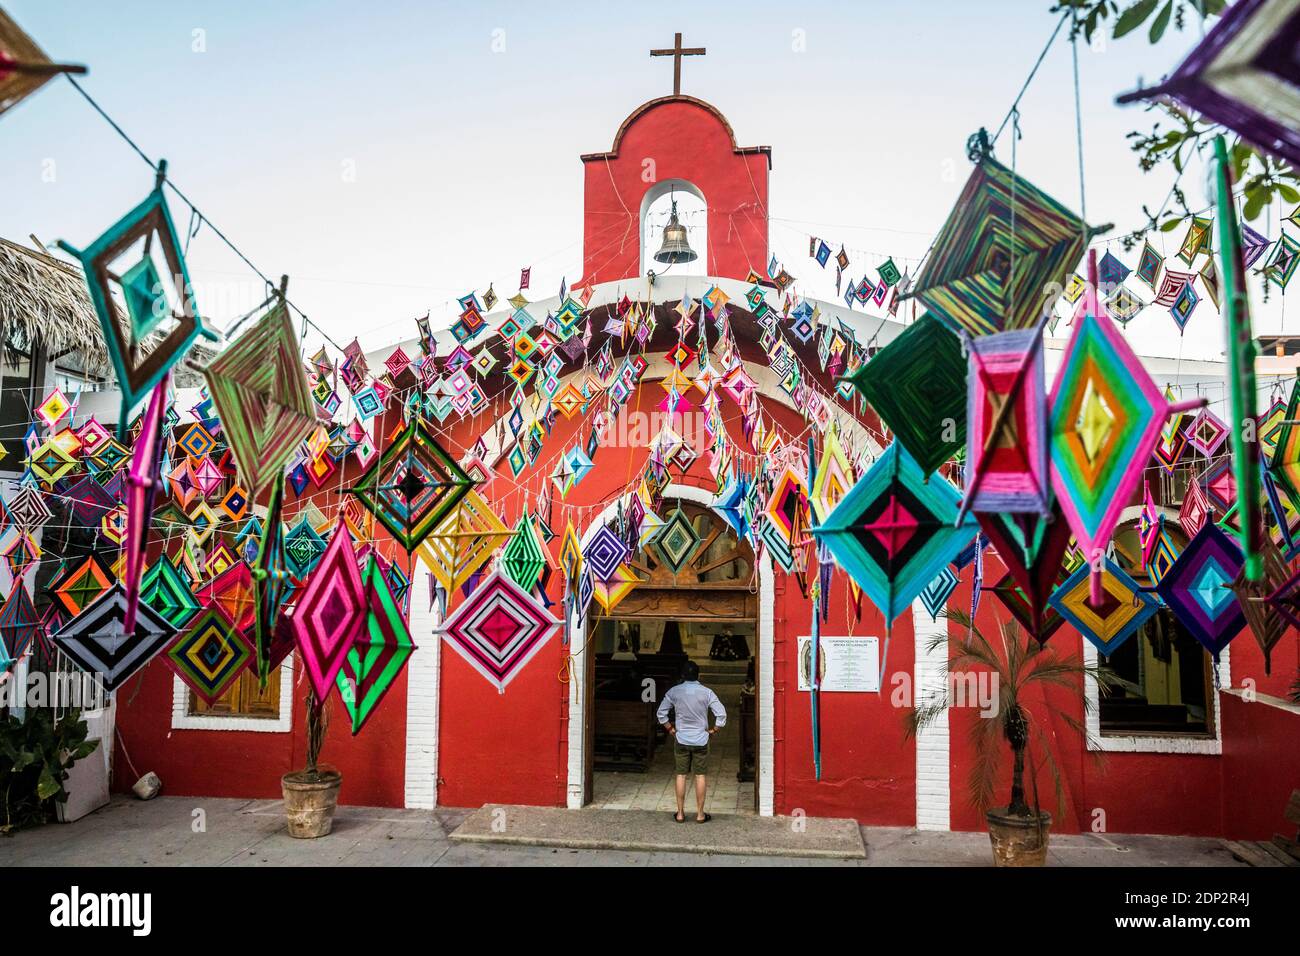 The main church in Sayulita, Nayarit, Mexico decorated outside with Ojo de Dios or "God's Eye", a local symbol and craft of the indigenous Huichol cul Stockfoto